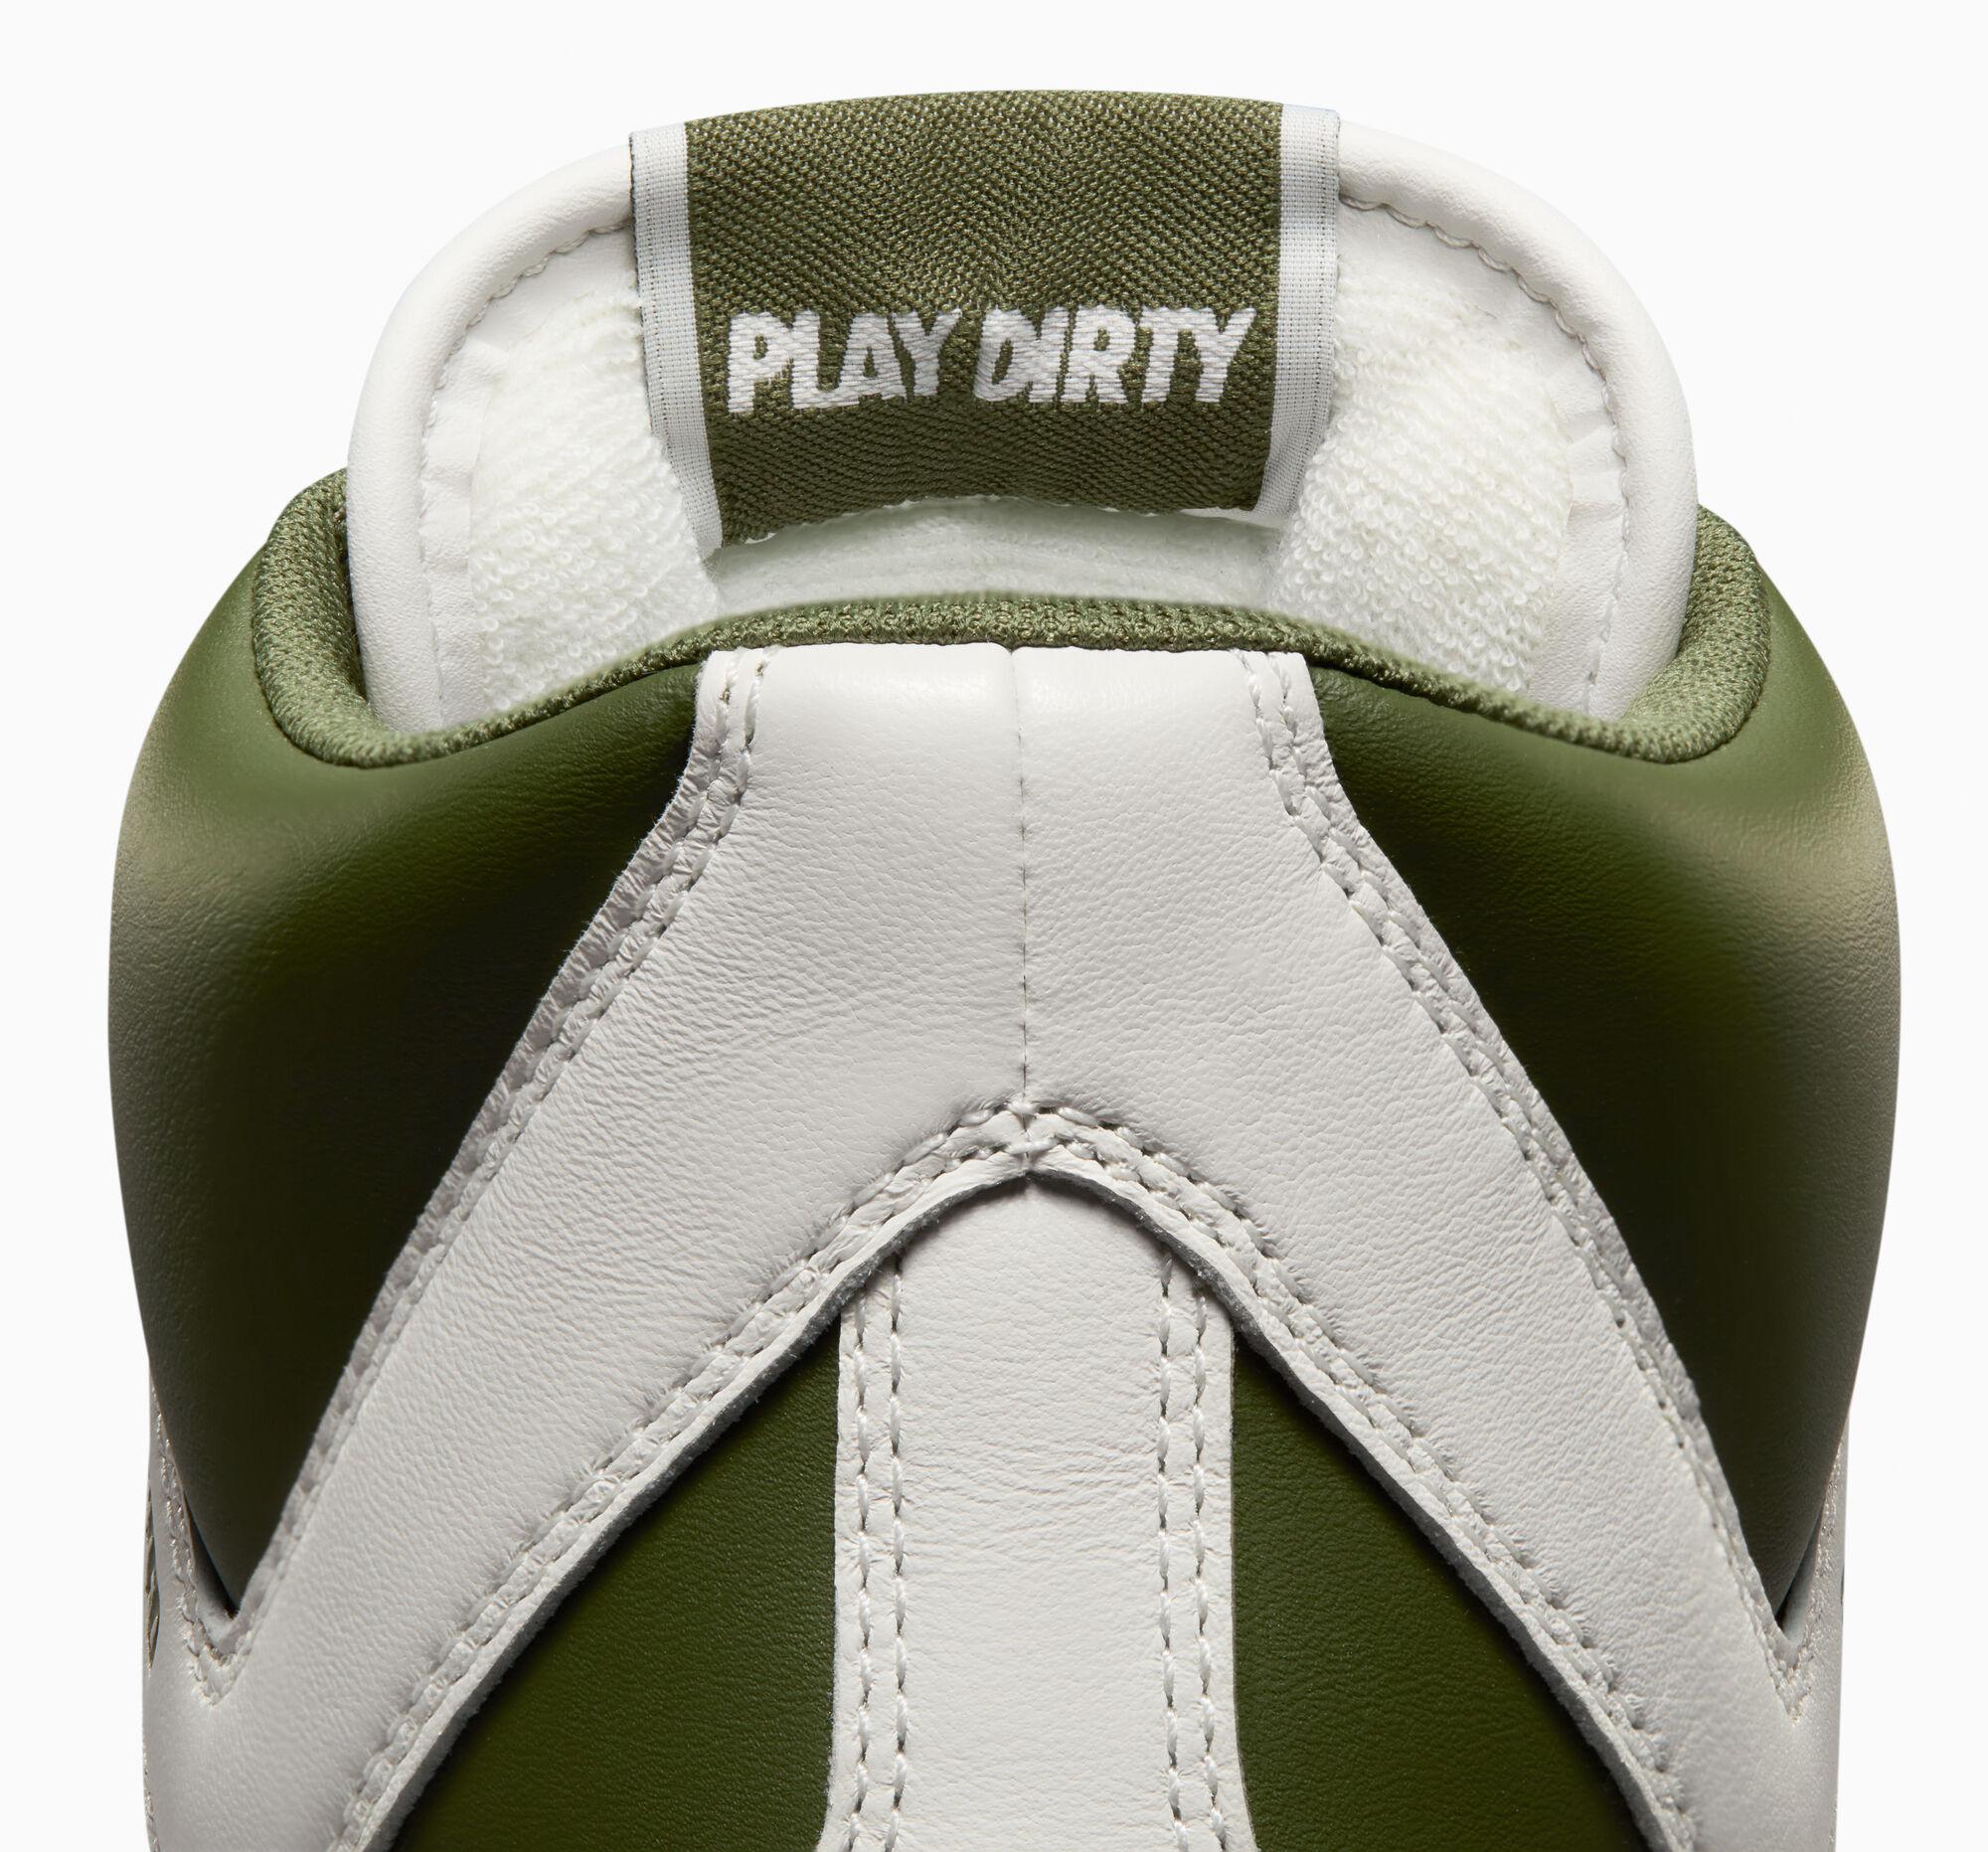 Undefeated x Converse 'Chive' play dirty